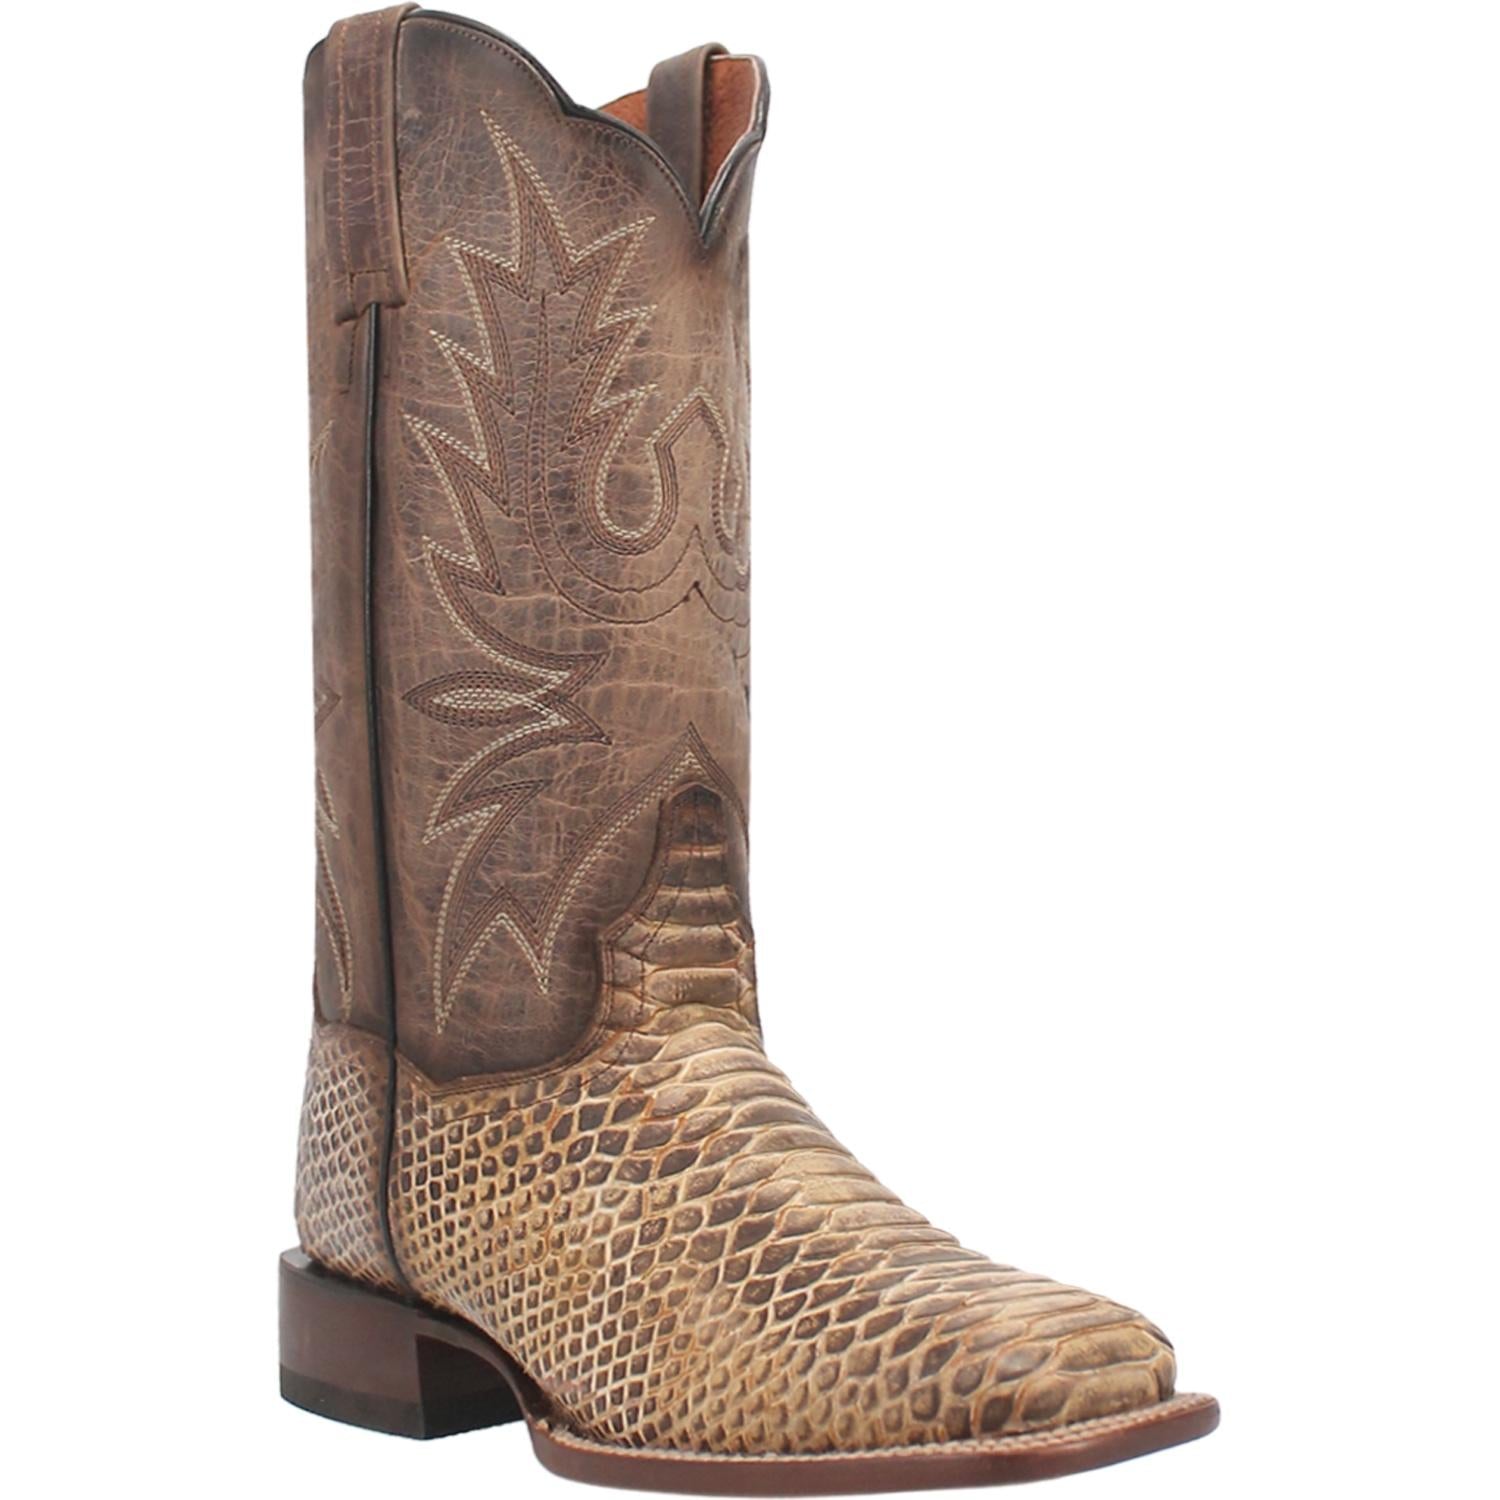 DEE FAUX PYTHON LEATHER BOOT Cover